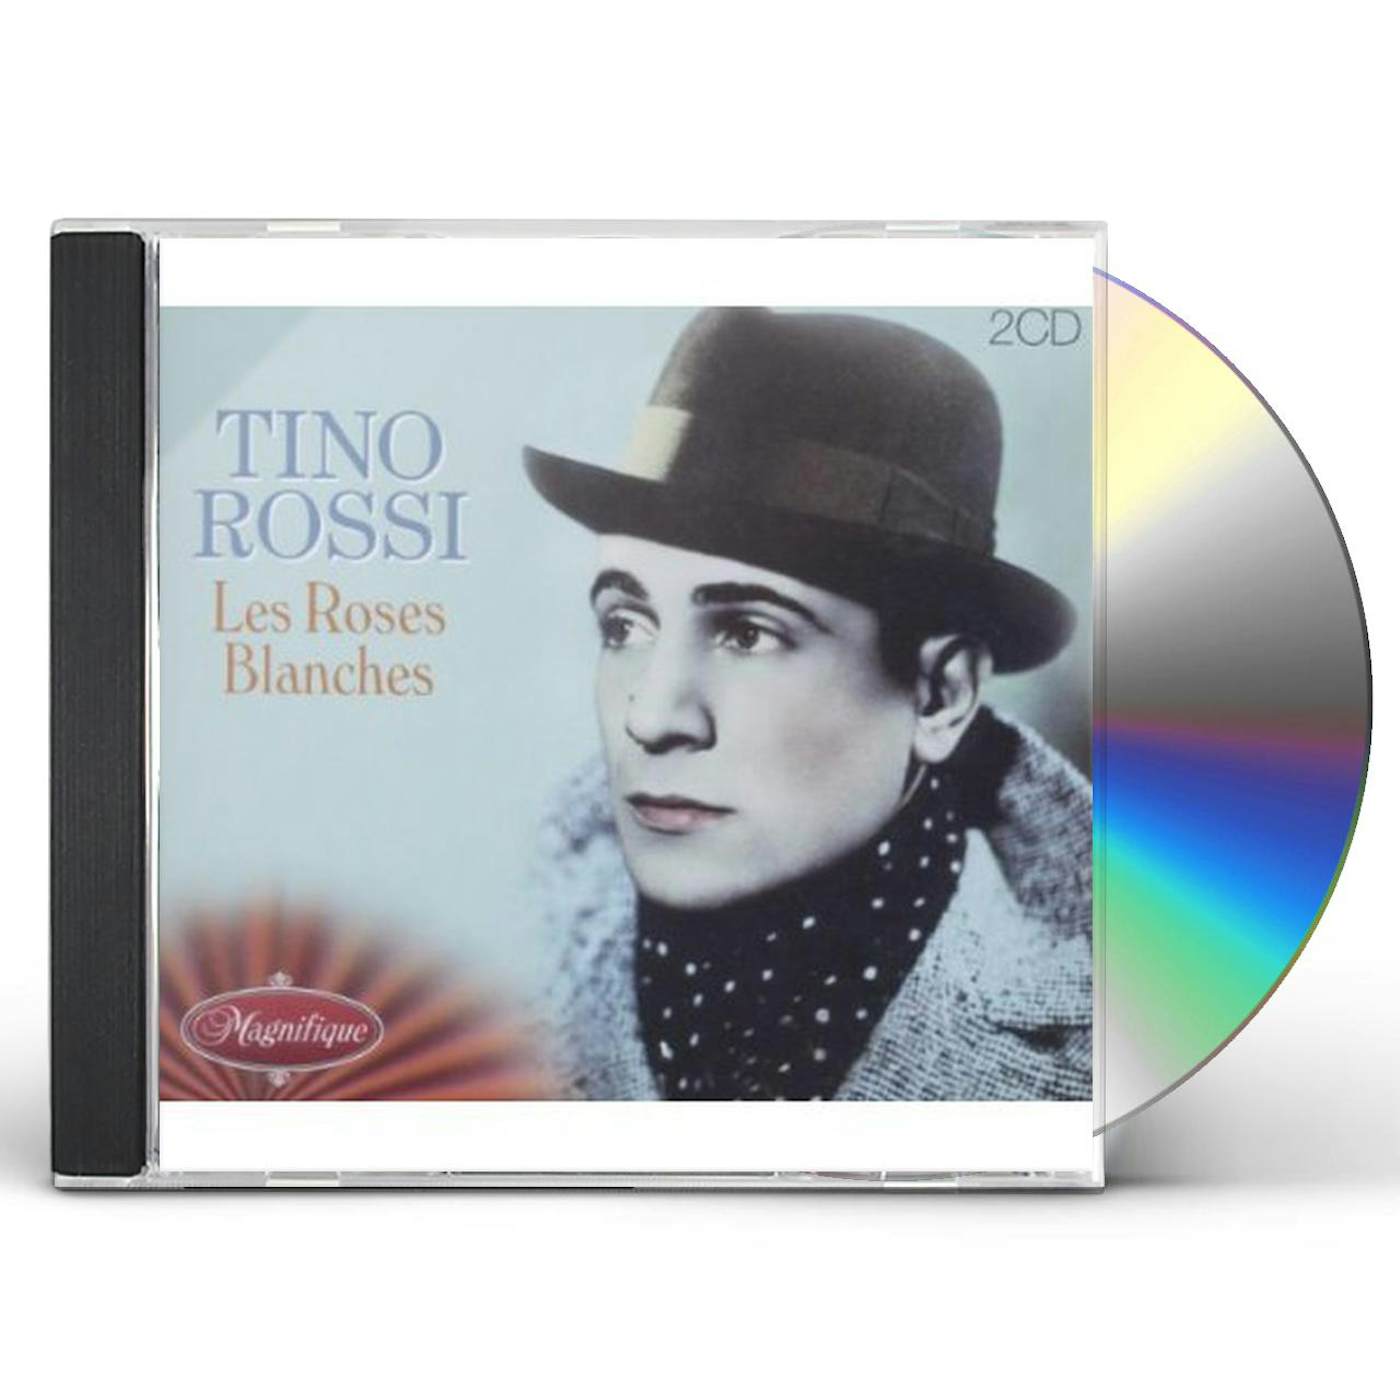 Tino Rossi LES ROSES BLANCHES CD